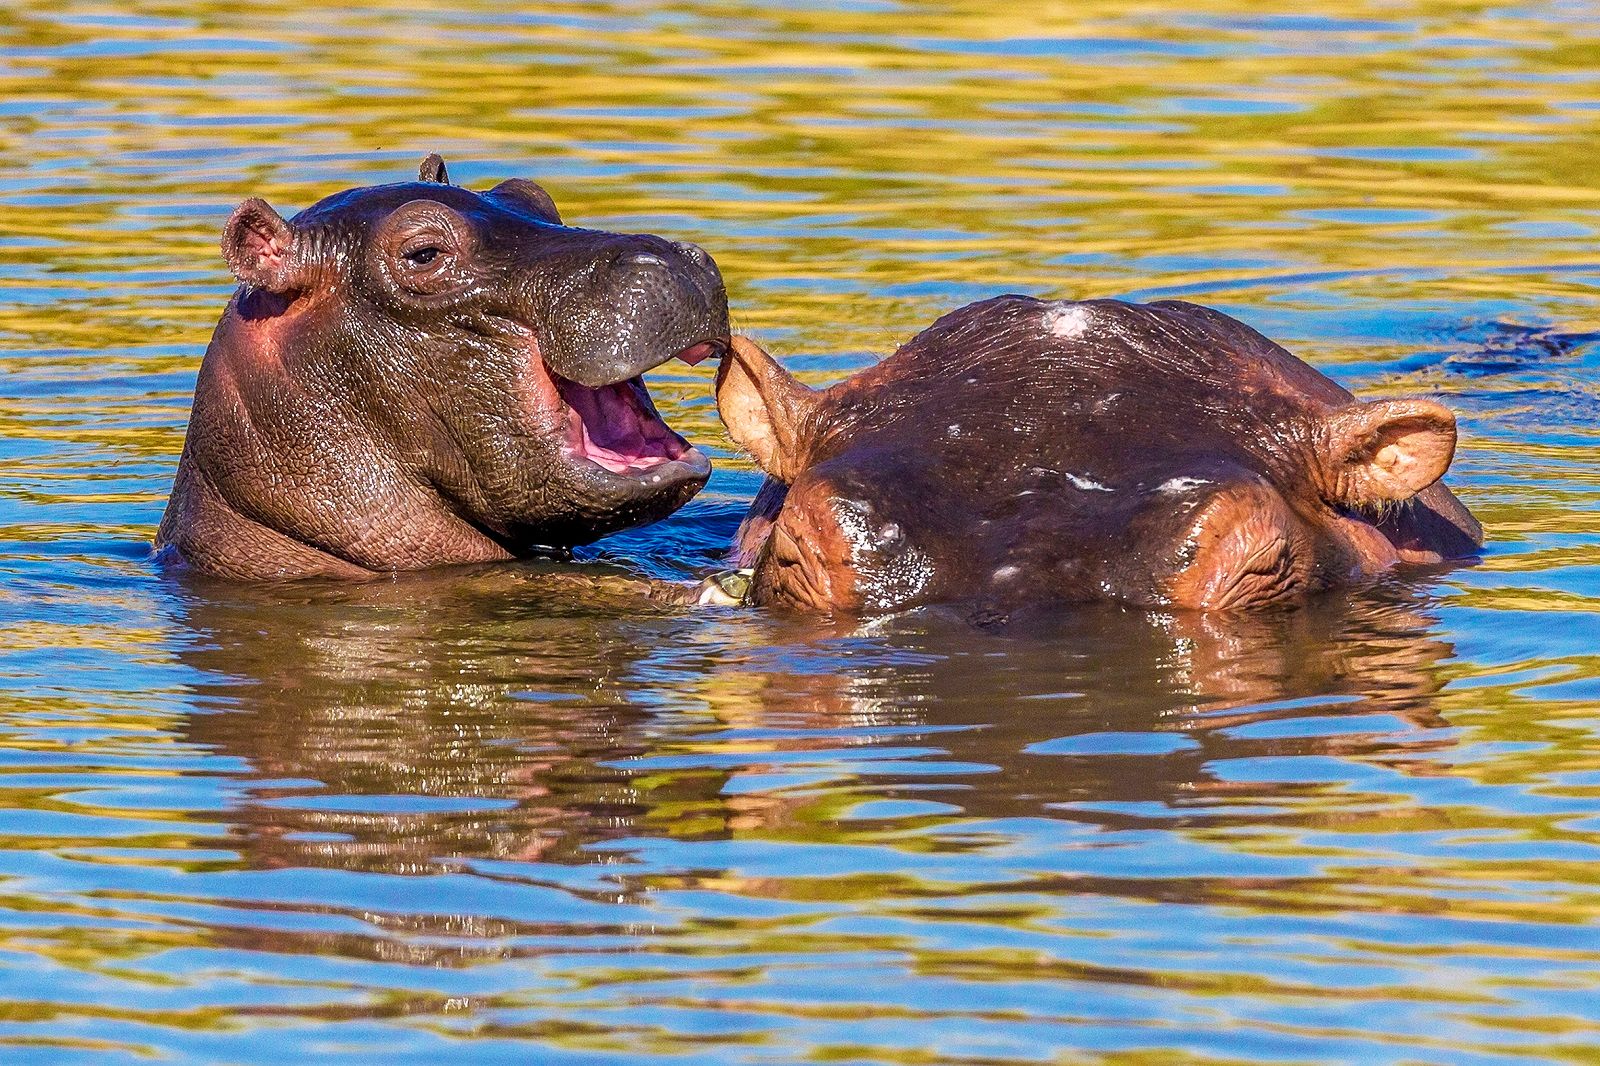 Enjoy a good giggle with the Comedy Wildlife Photography awards photo 22